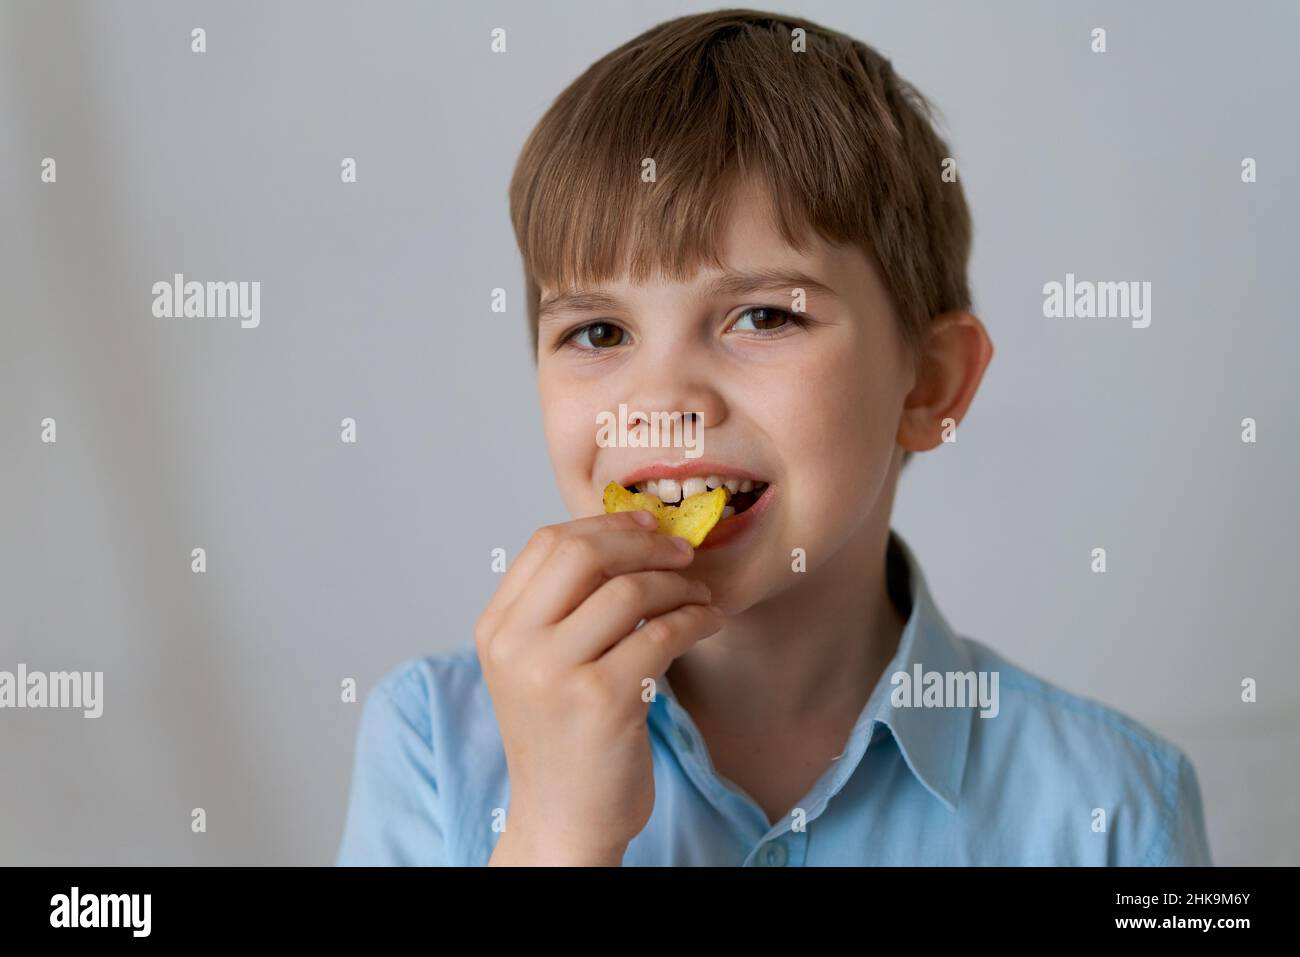 Close up portrait cheerful child having fun eating potato chips isolated on gray background. Cute little boy eating chips and smiling looking at the camera. Caucasian child eats junk food Stock Photo